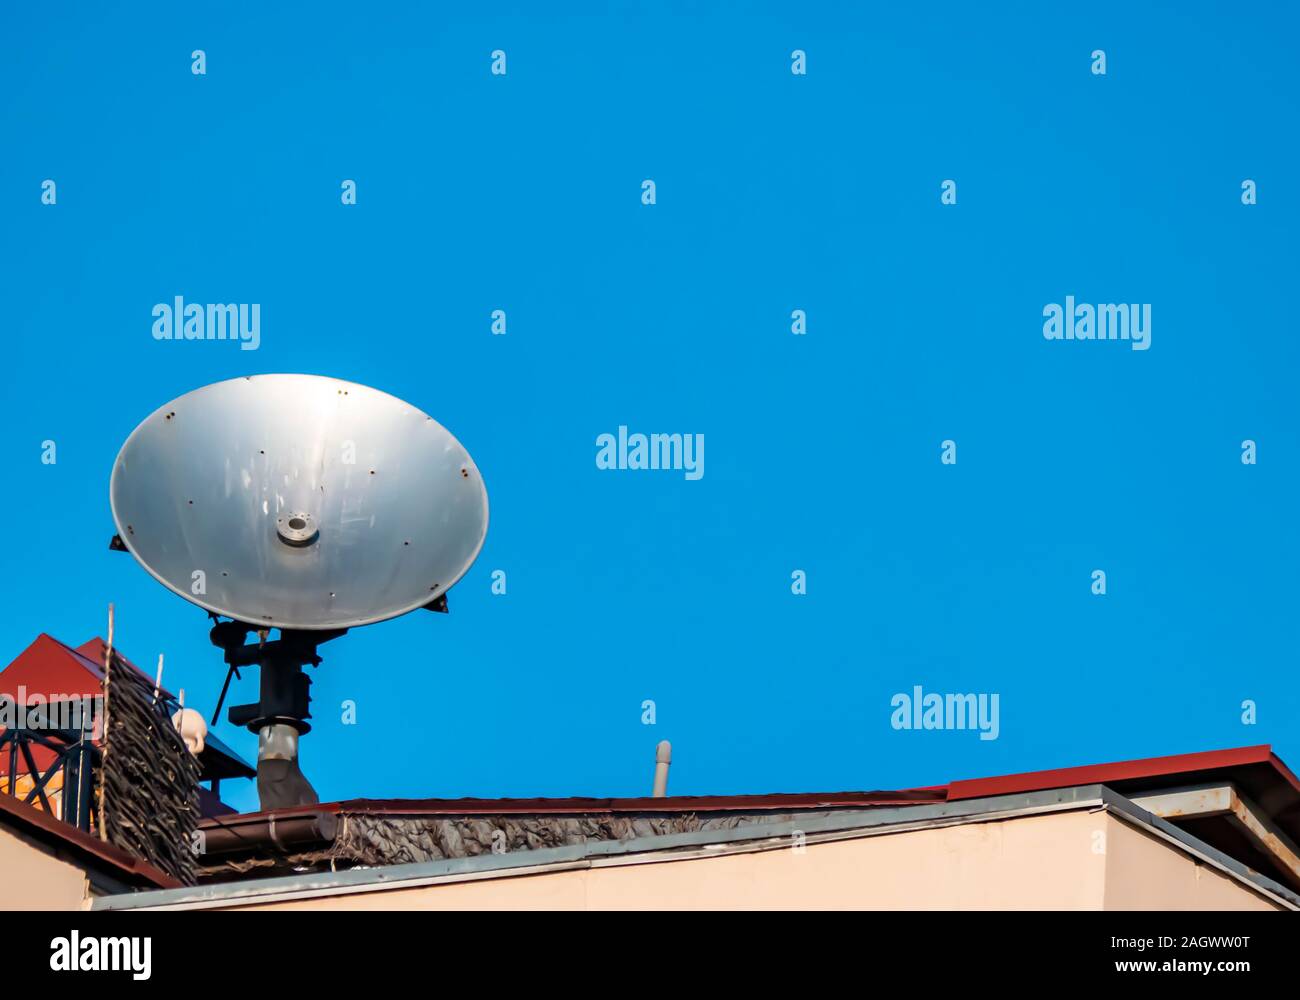 Satellite dish on the roof of the building against the blue sky.  Technology. Place for text. Background image Stock Photo - Alamy